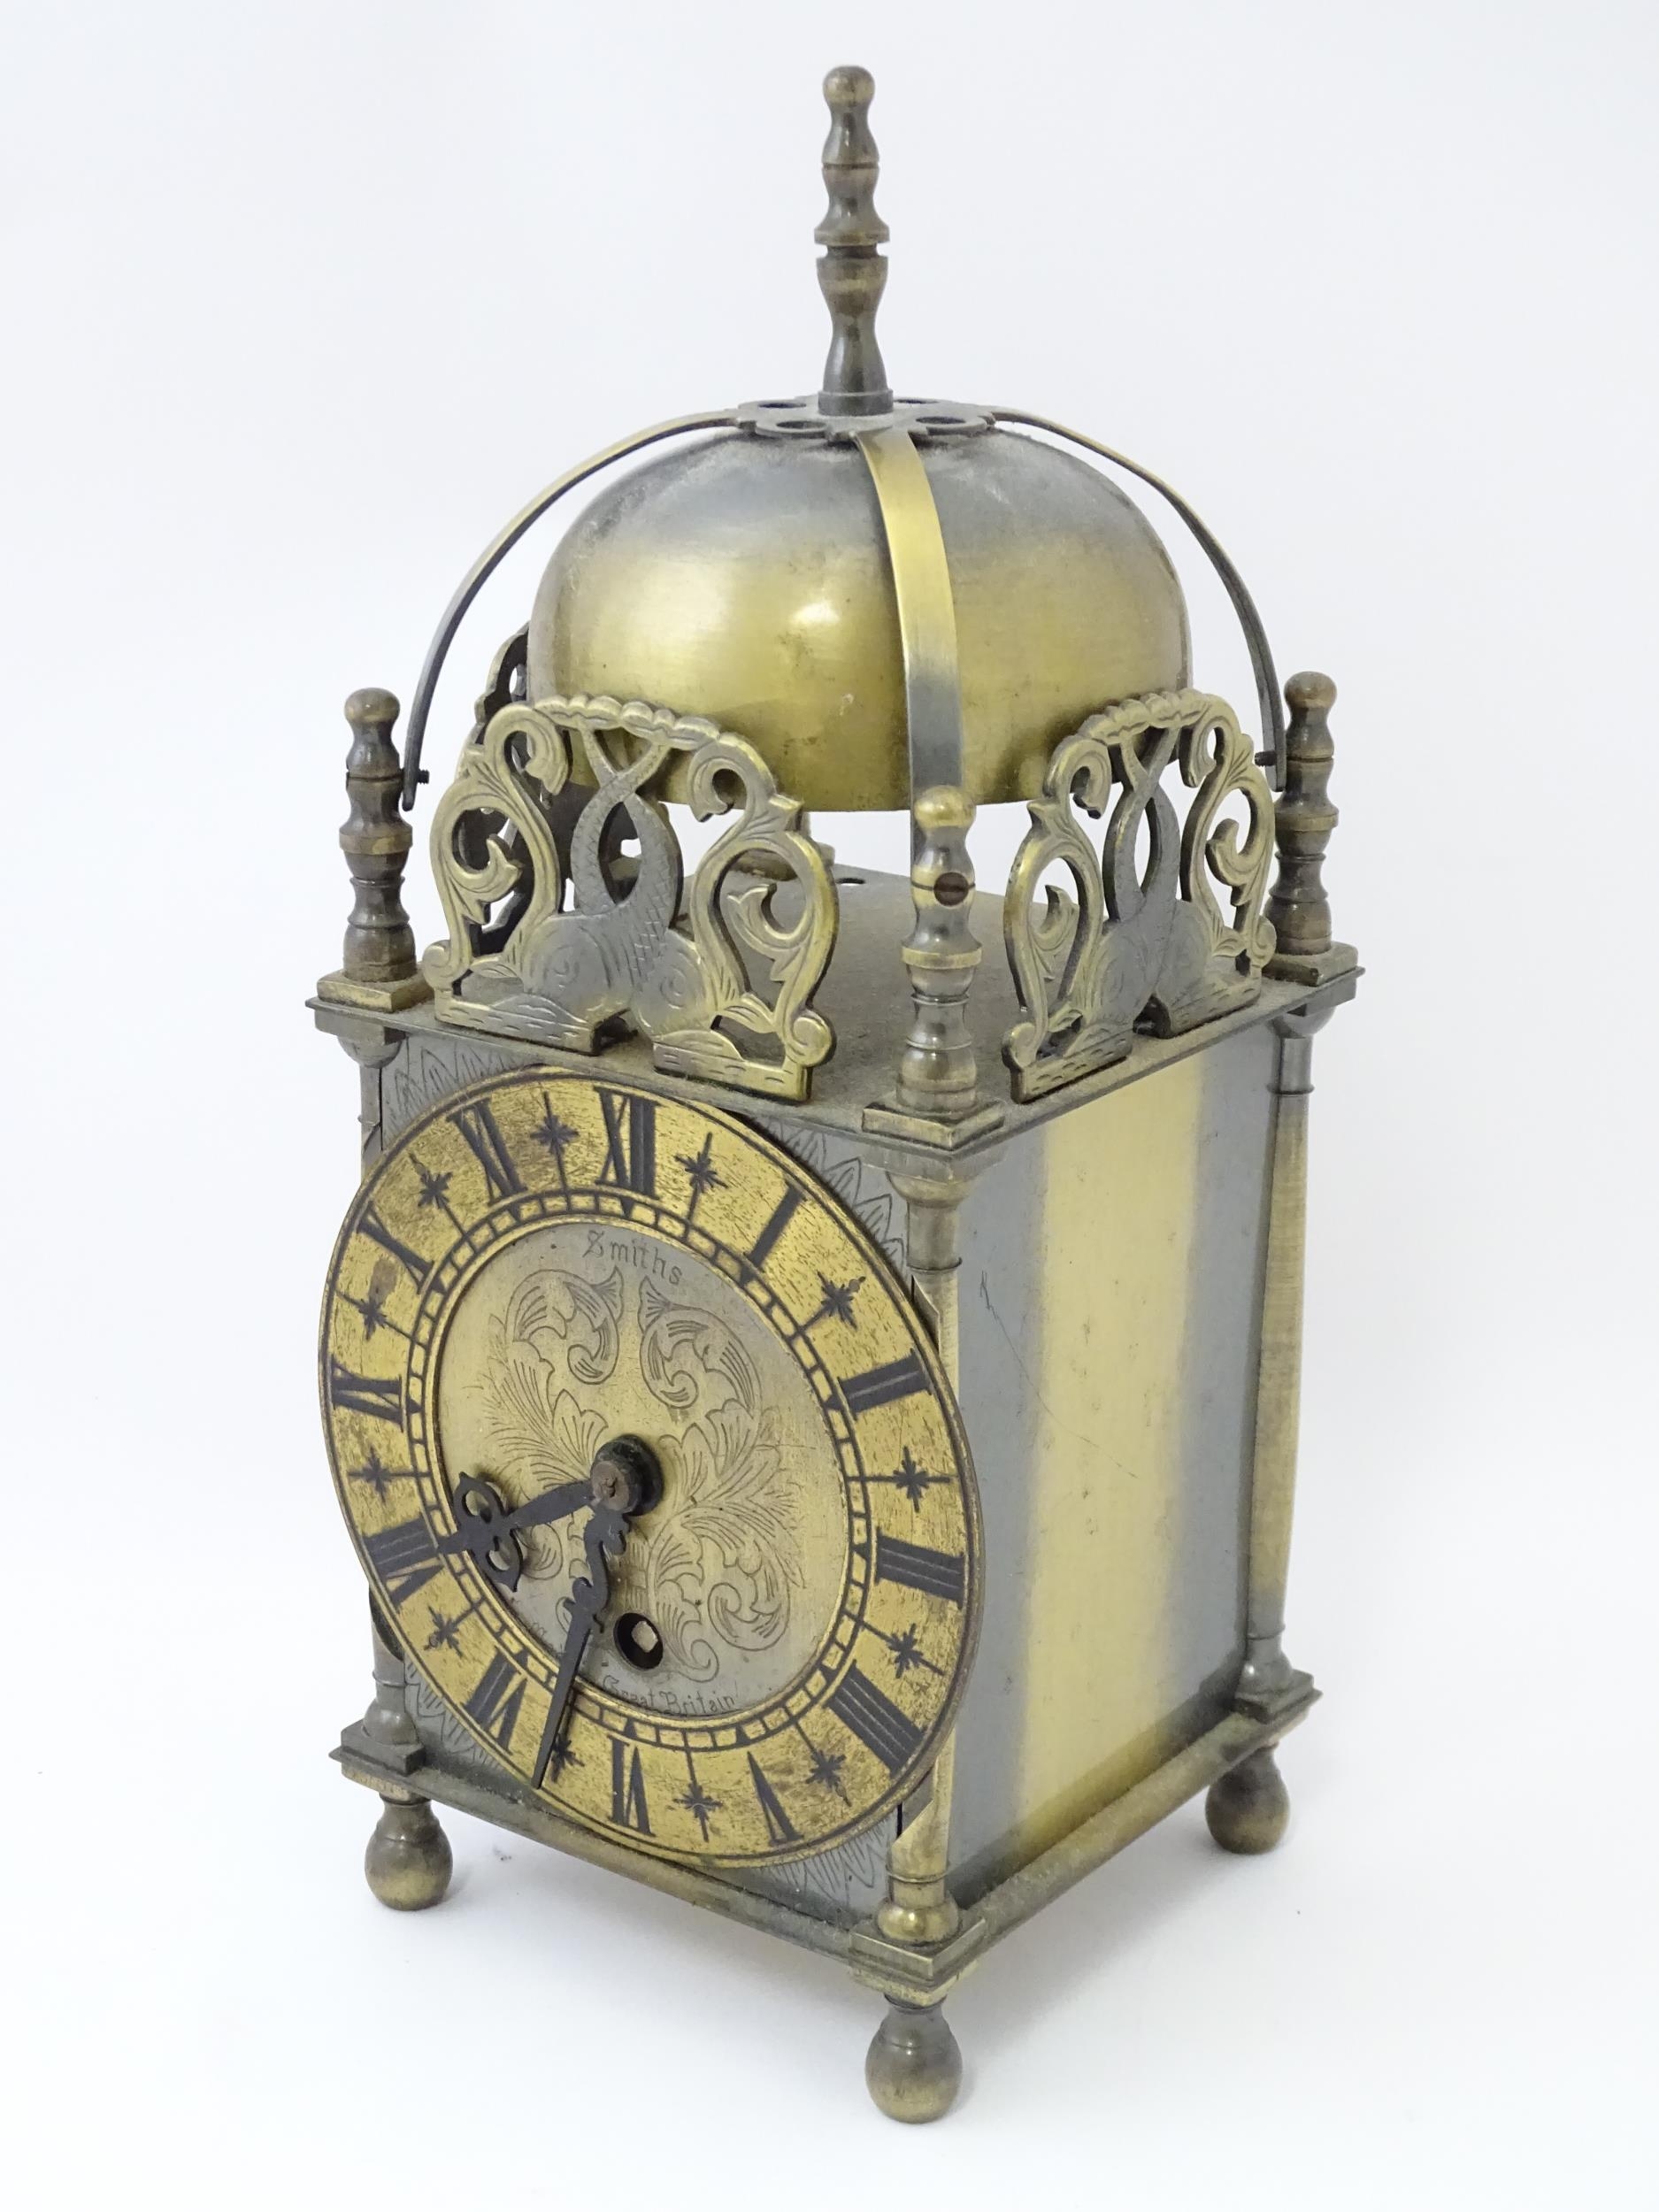 Smiths - Great Britain : A 20thC brass lantern clock by Smiths with engraved dial and Roman - Image 5 of 11